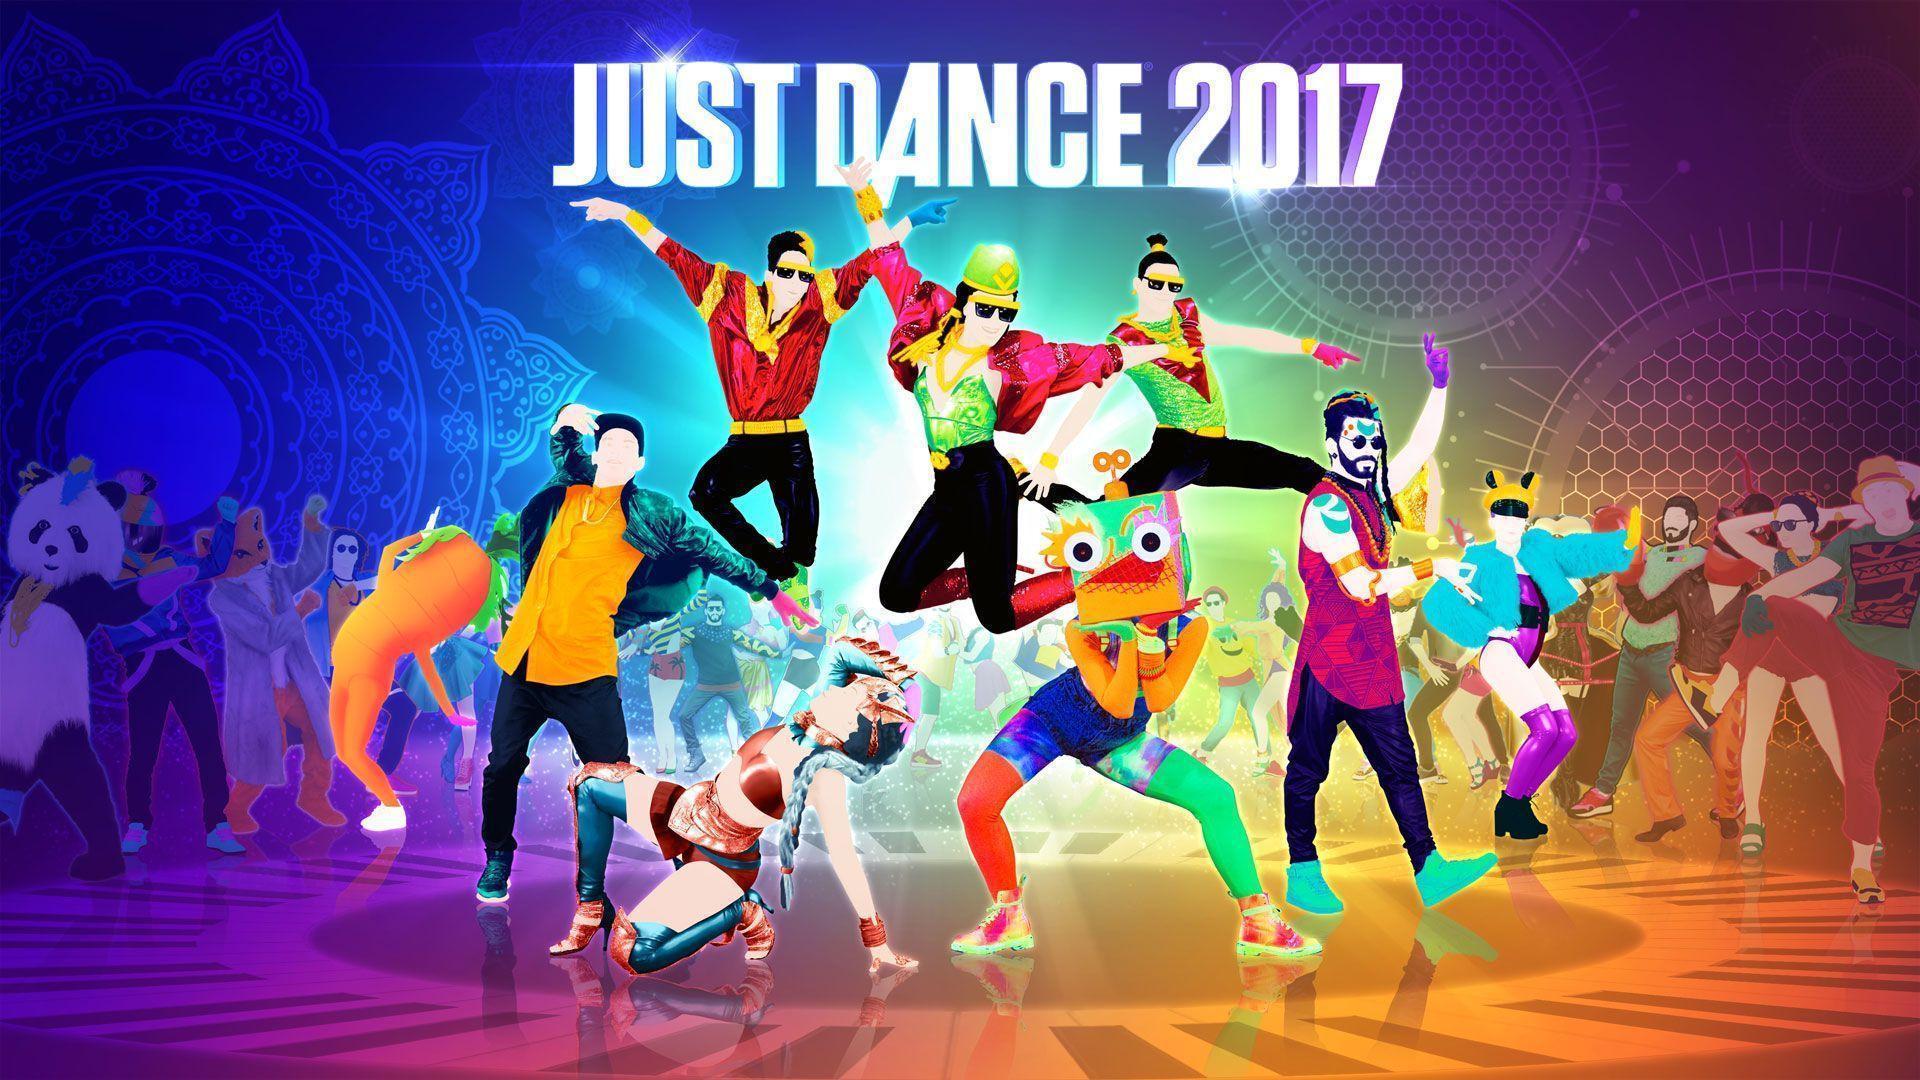 NEW TRACKS NOW AVAILABLE IN JUST DANCE UNLIMITED!. Just Dance